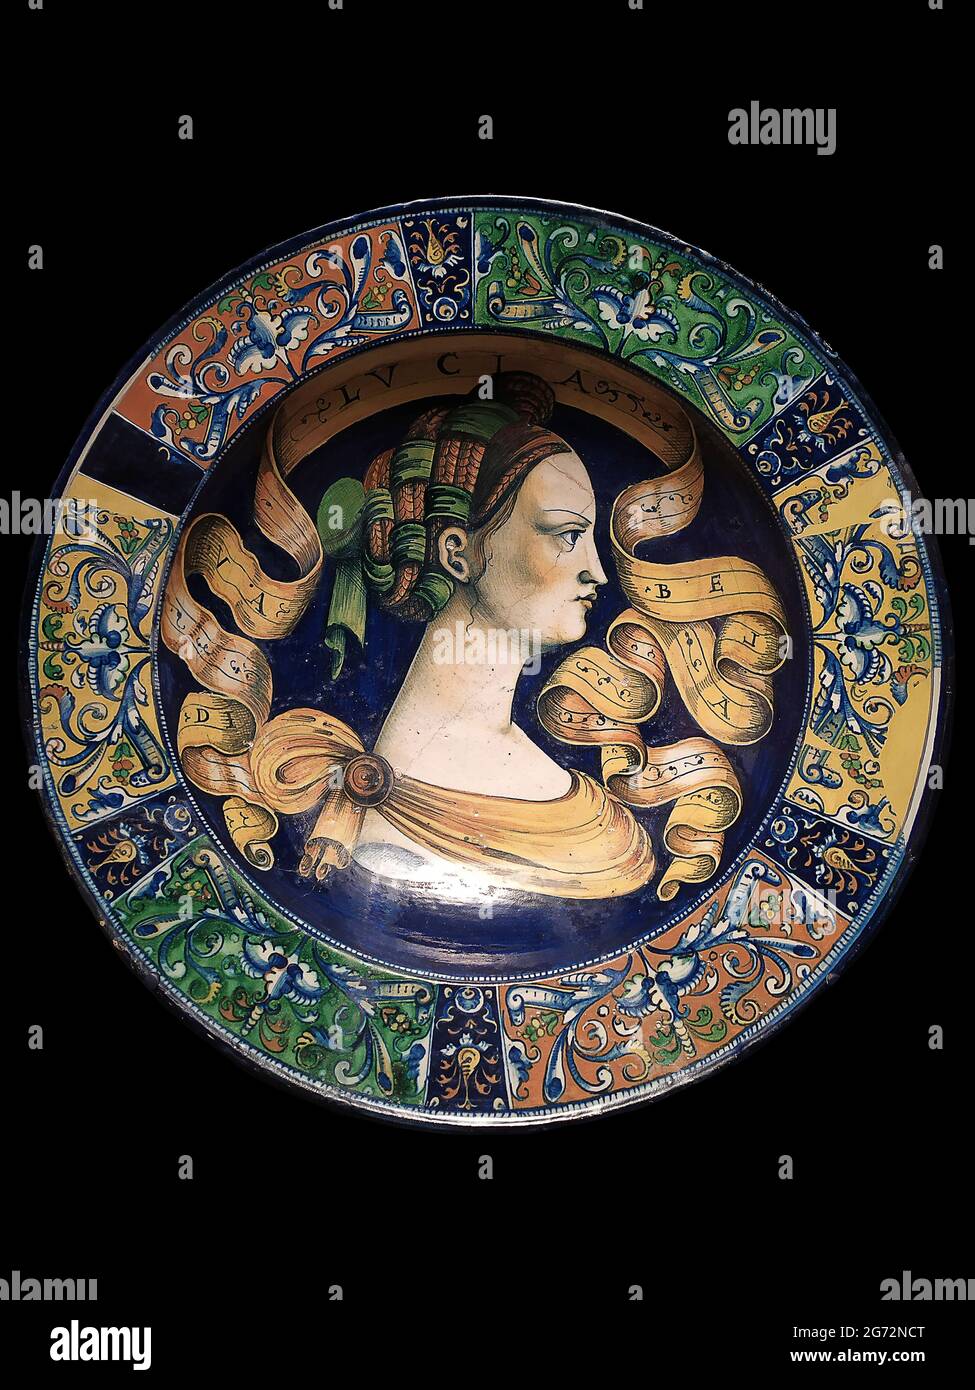 Tin-glazed earthenware plate of the first third of the 16th century. Stock Photo